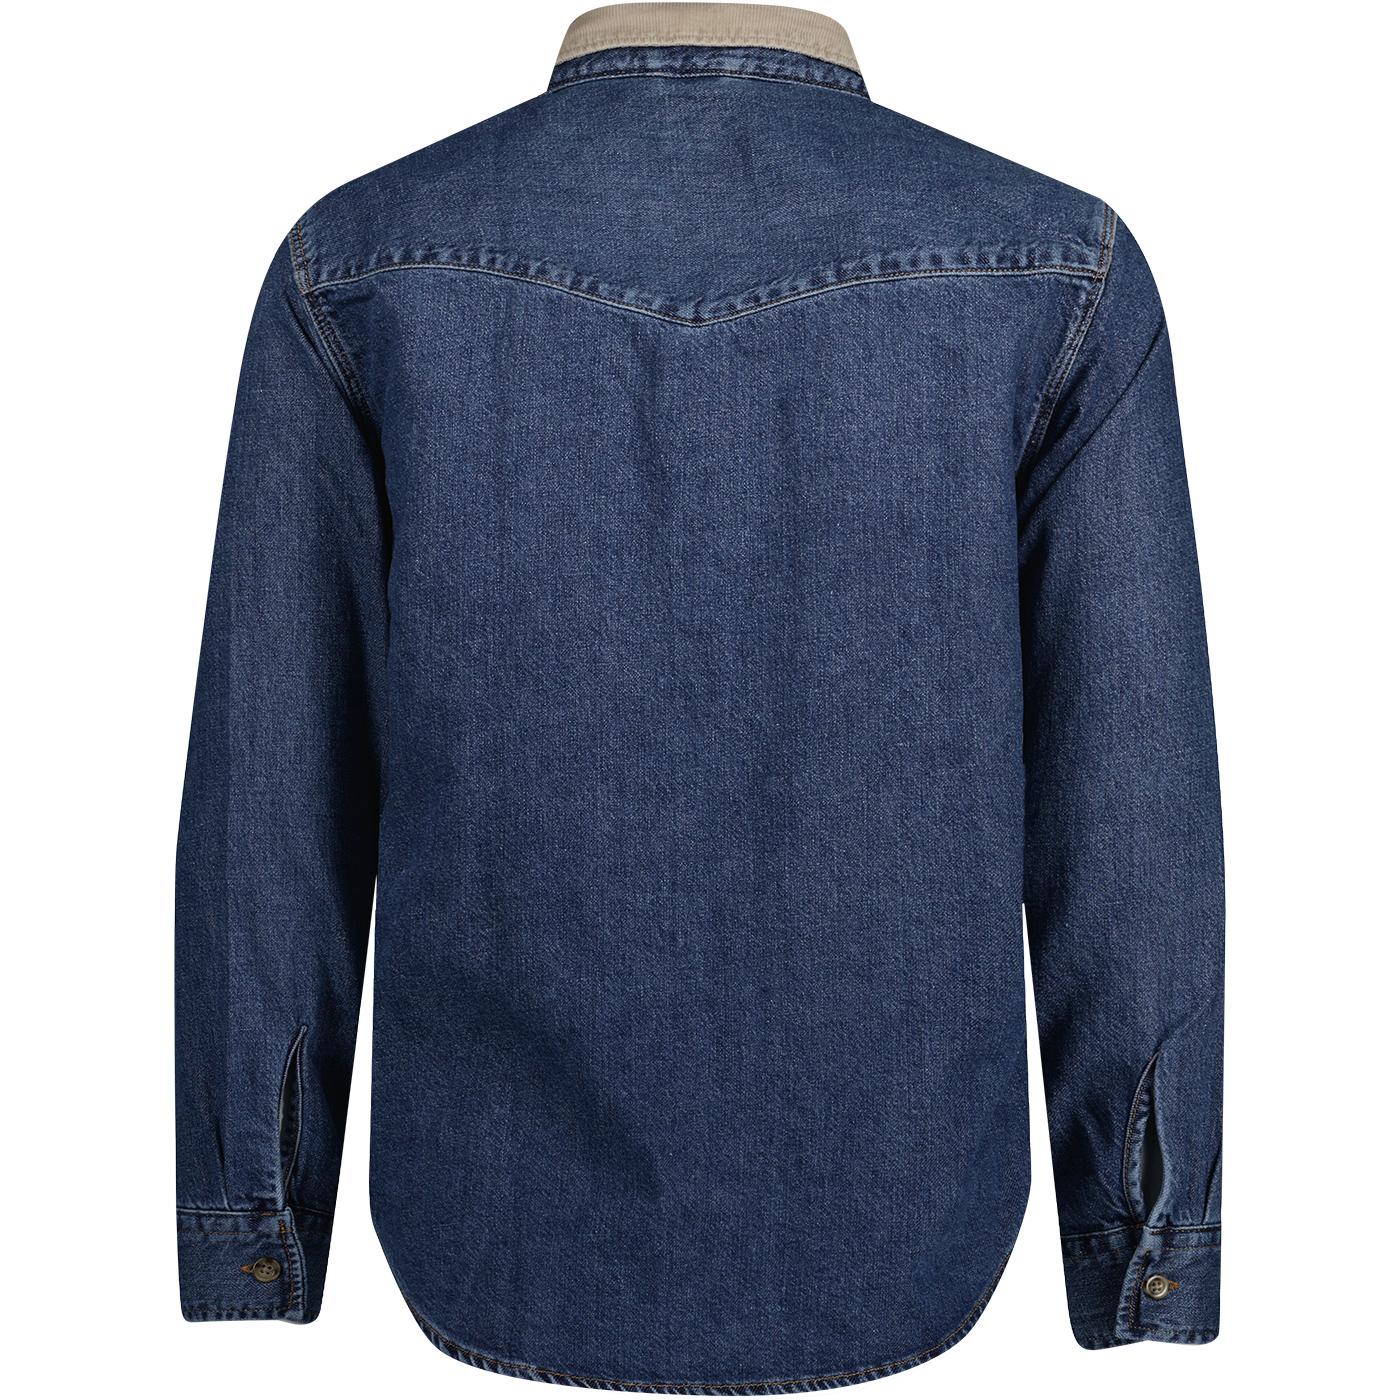 LEVI'S® Relaxed Fit Retro Western Shirt in Blue Stonewash